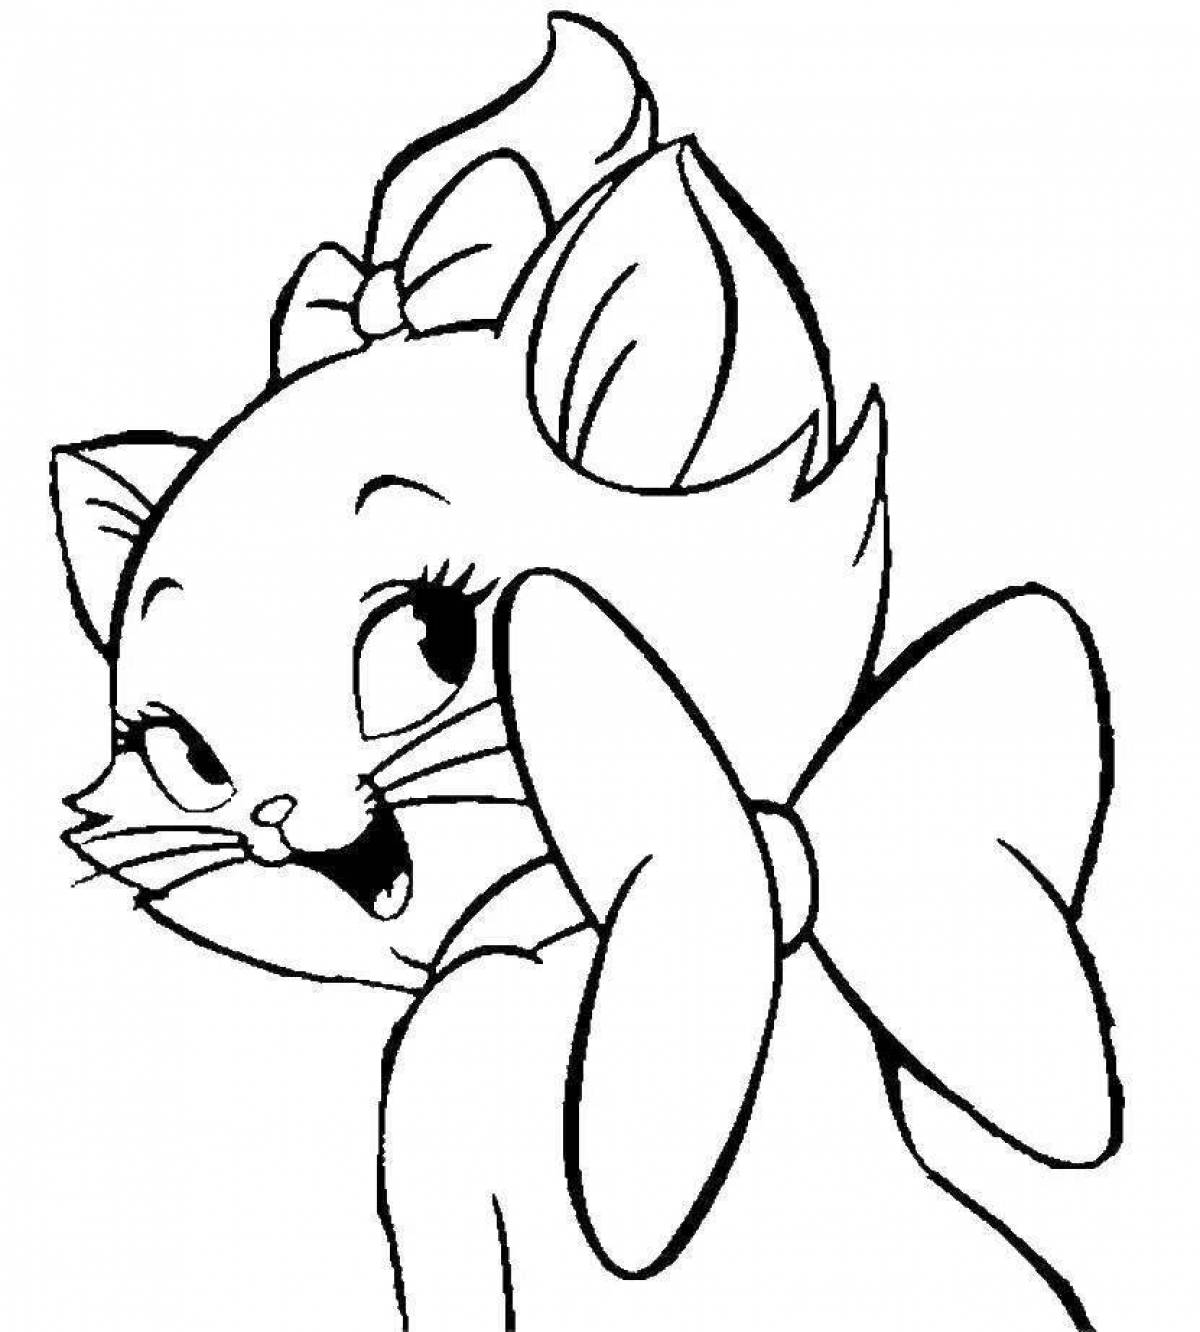 Brilliant marie kitty coloring page